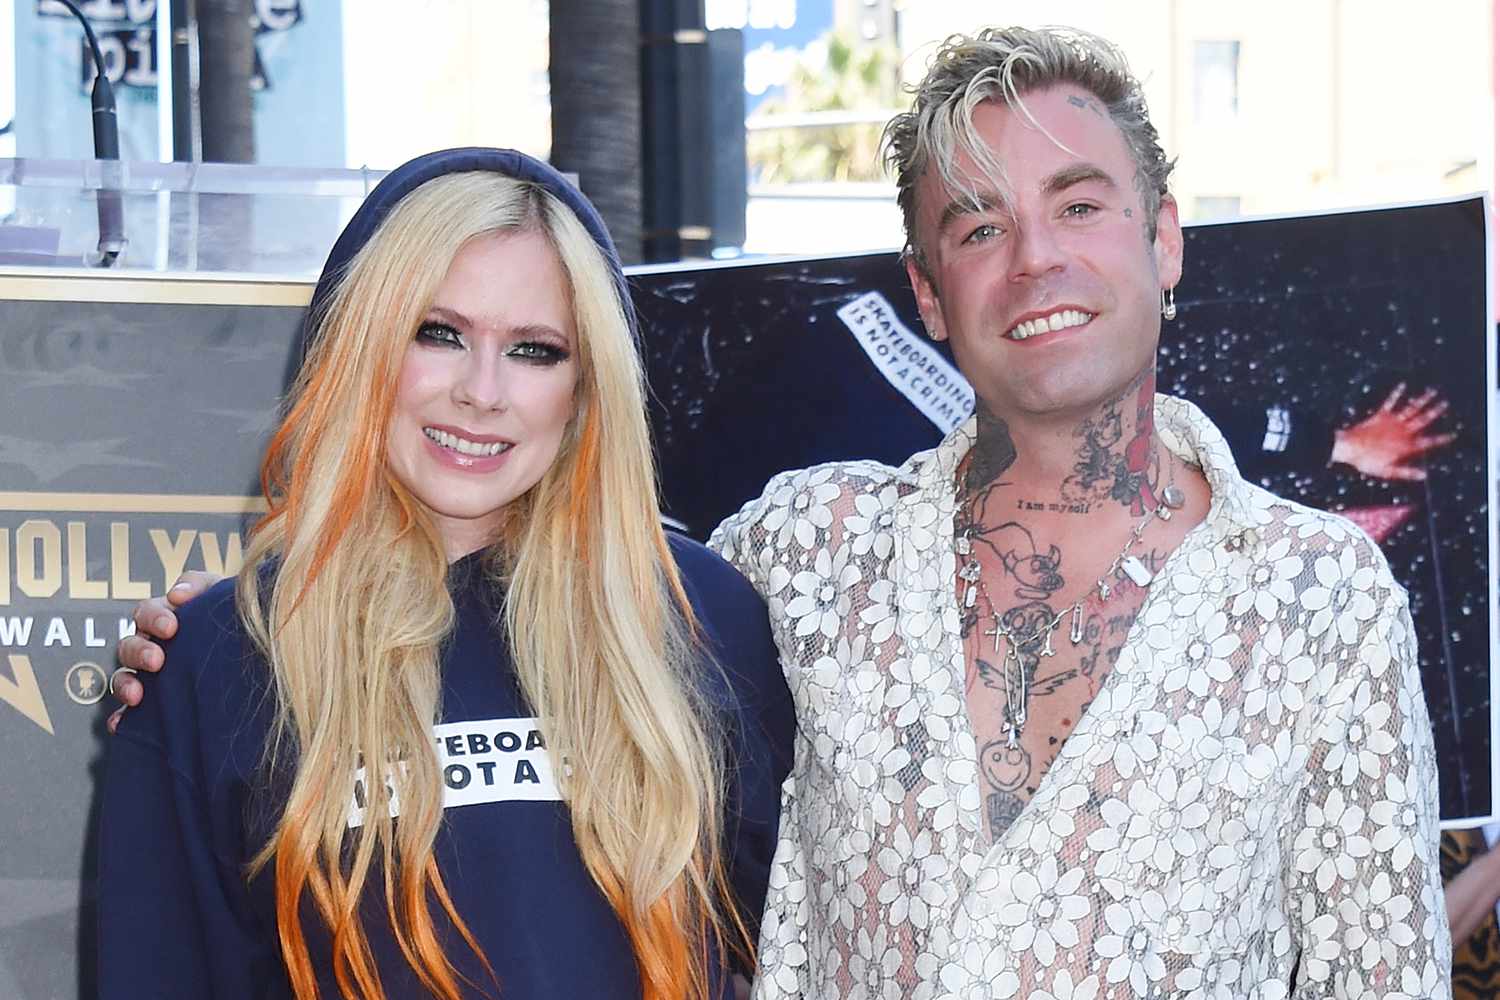 Avril Lavigne, Mod Sun at the star ceremony where Avril Lavigne is honored with a star on the Hollywood Walk of Fame on August 31, 2022 in Los Angeles, California.